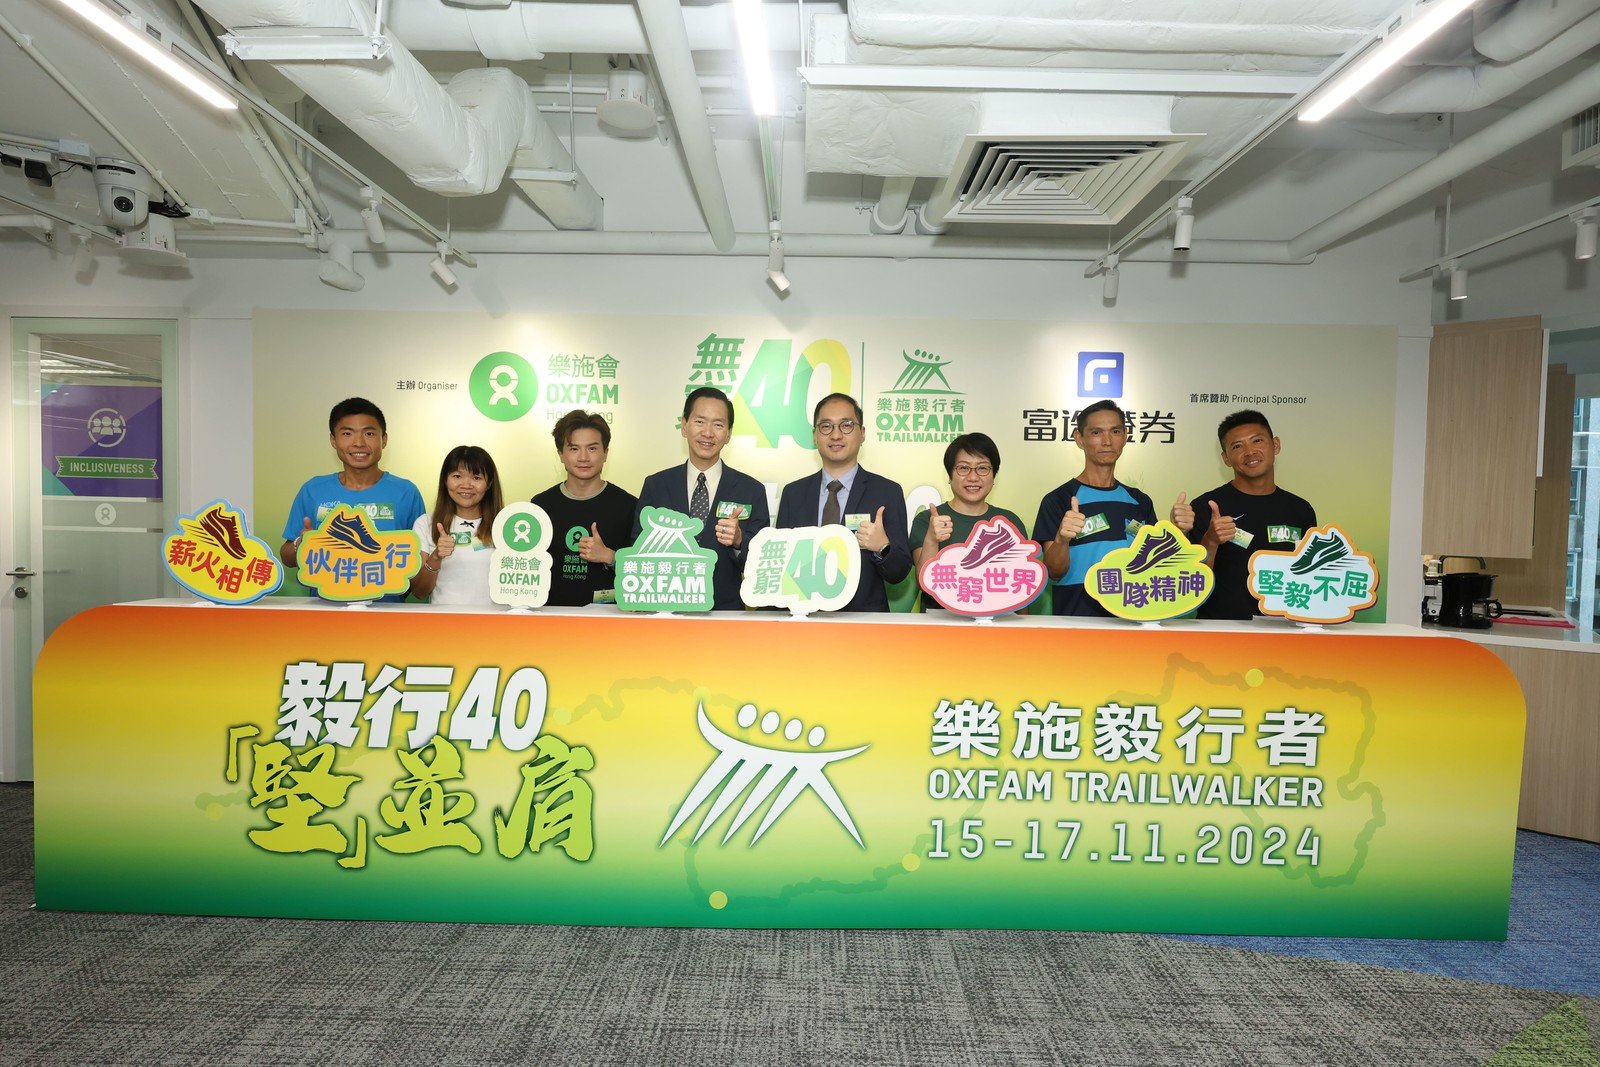 Celebrating its 40th anniversary, Oxfam Trailwalker embraces the theme "40 Years, Stronger Together." this year. Honoured guests jointly officiated the opening ceremony, marking the start of the event. From left to right: Elite walker Tsang Fuk Cheung, Leung Ying Suet ; Oxfam Ambassador Andy Leung Chiu Fung ; Bernard Chan, Oxfam Trailwalker Steering Group Convenor ; Daniel Tse, Managing Director of Futu Securities International (Hong Kong) Limited, Oxfam Trailwalker Principal Sponsor ; Kalina Tsang, Director General of Oxfam Hong Kong ; KK Chan Kwok Keung, founder of the TTR Trailwalker Teaching Room Charity Foundation ; Elite walkers Law Chor Kin.